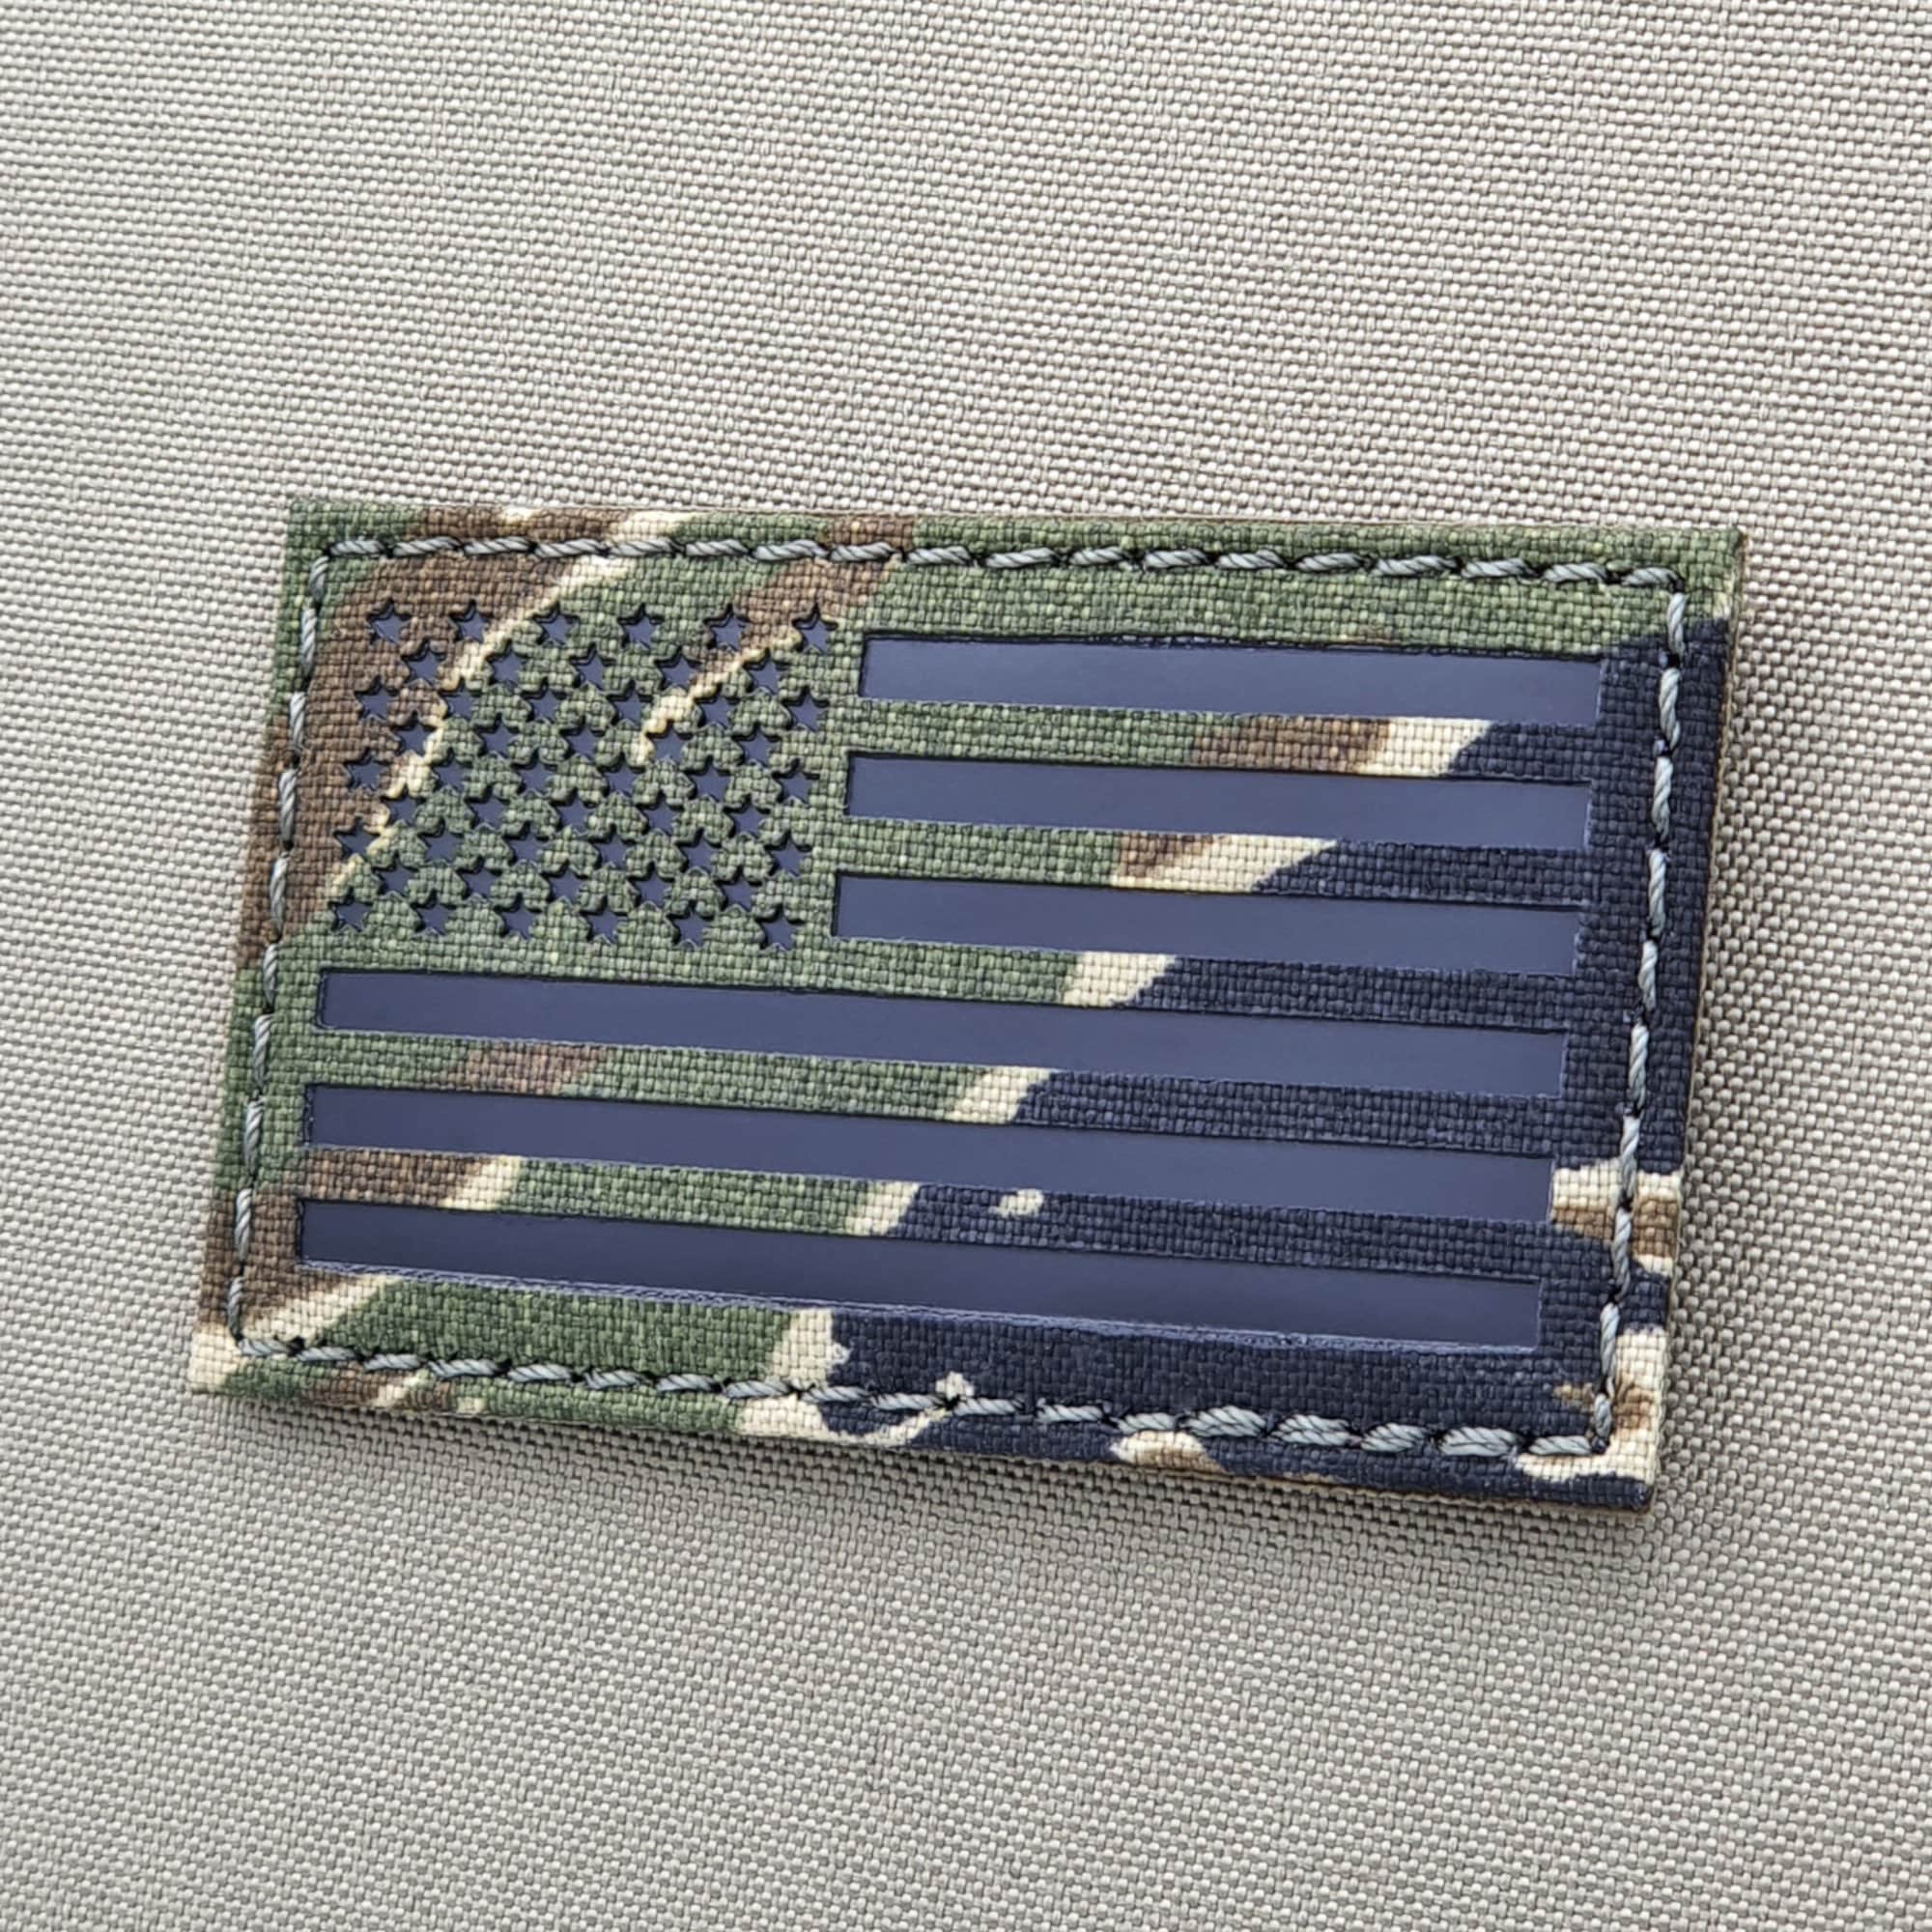 Reversed 3.5x2 Inch Infrared Multicam (OCP) Ir Us Flag Patch Us Army  Special Forces